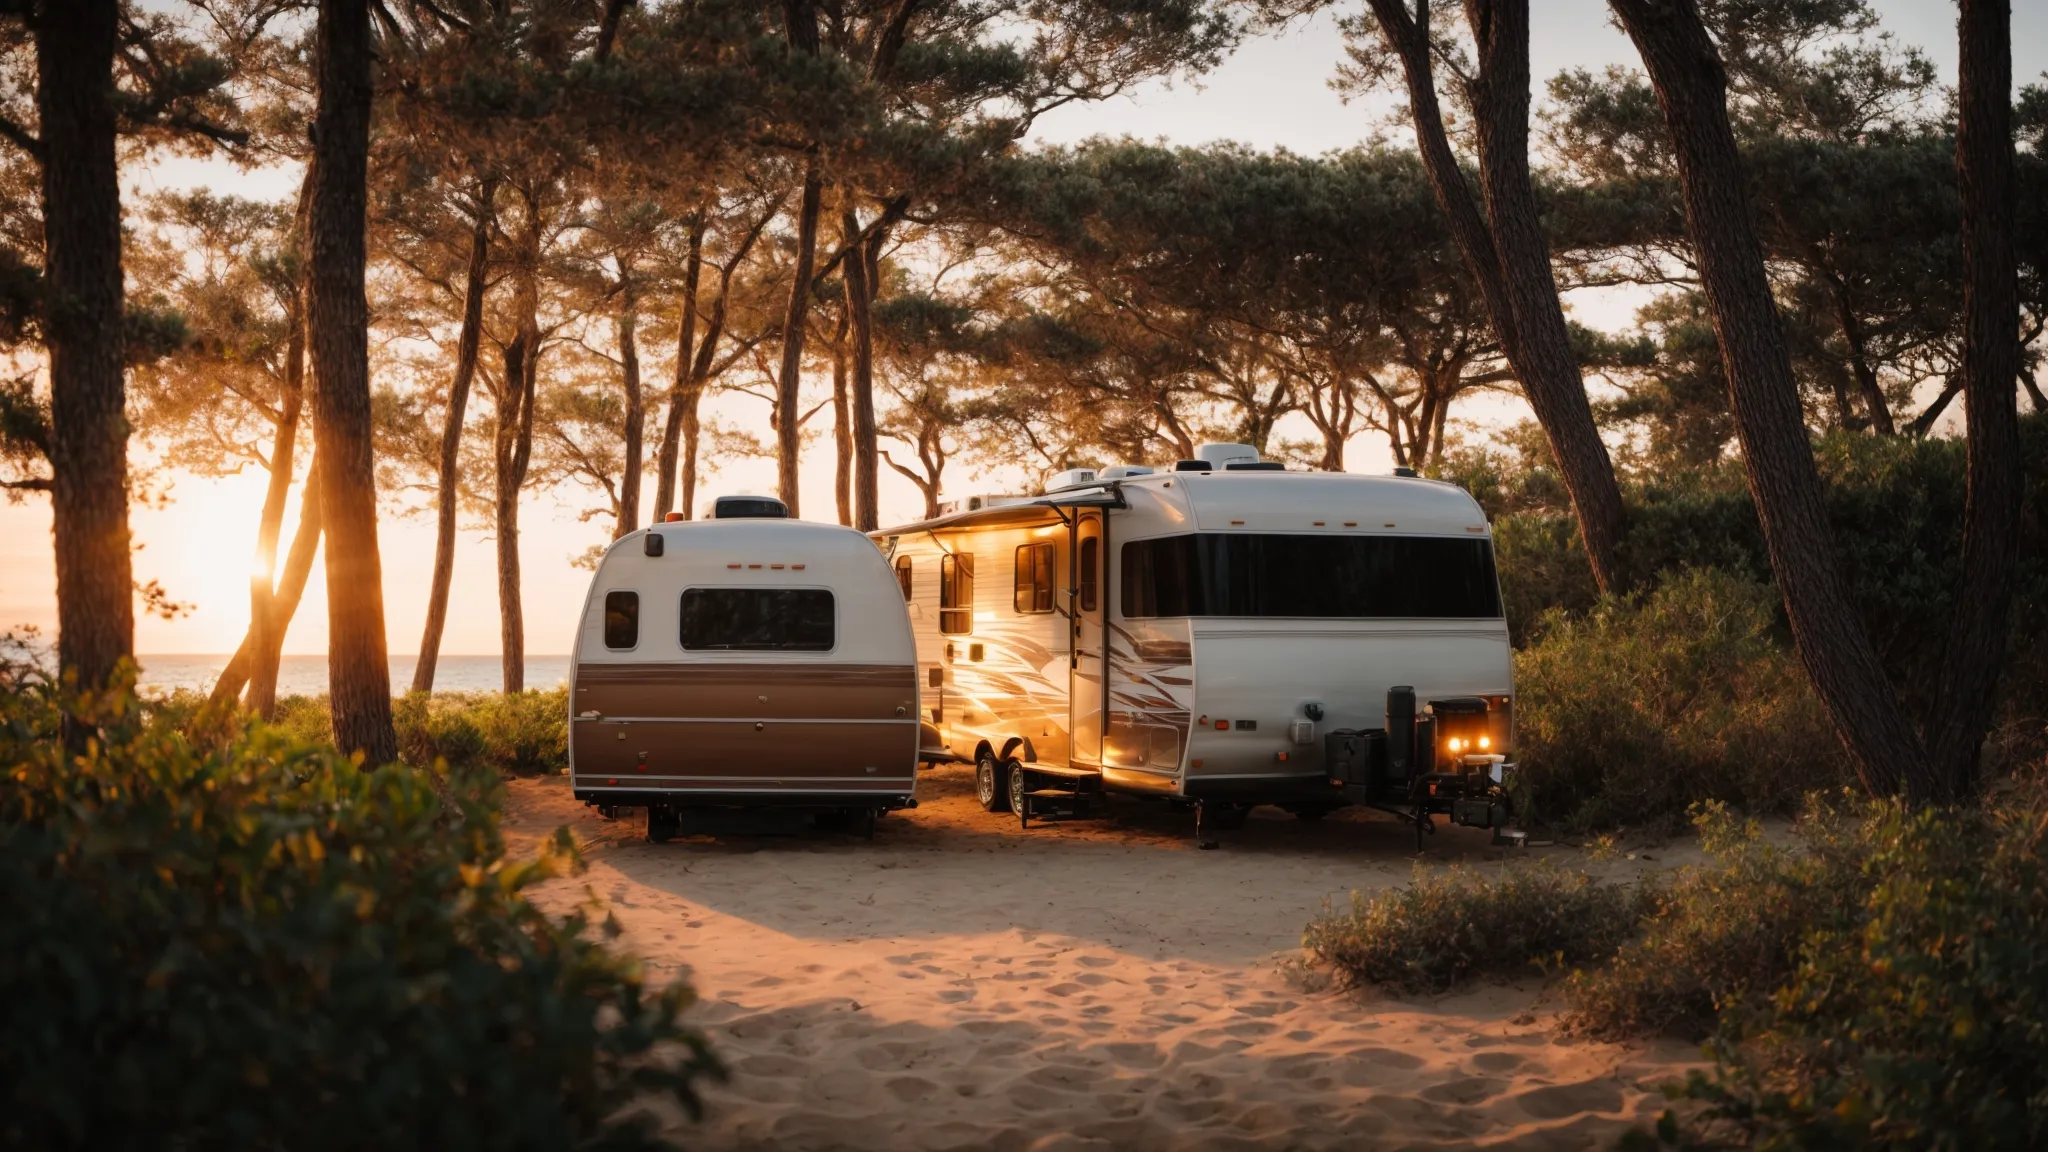 an rv nestled among shady trees overlooking a tranquil, secluded beach at sunset.